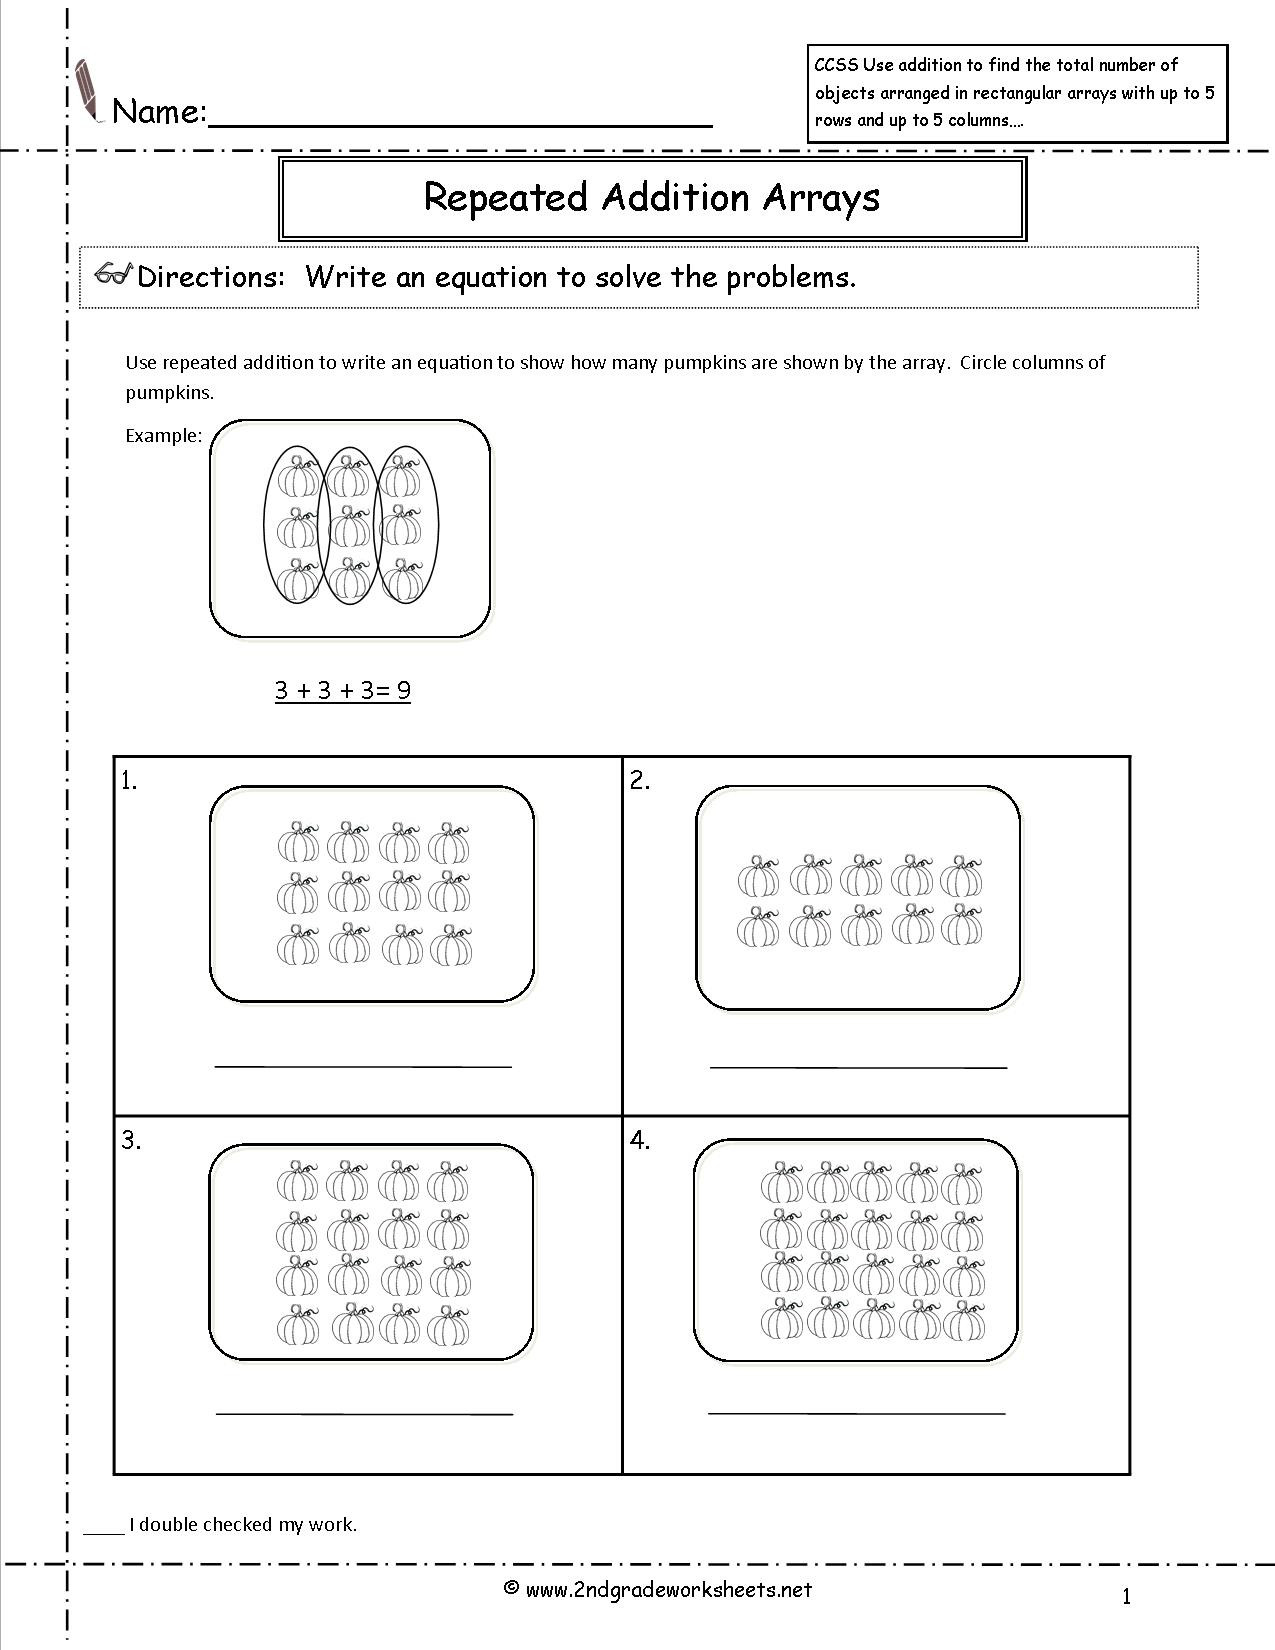 Repeated Addition Worksheets 2nd Grade Ccss 2 Oa 4 Worksheets